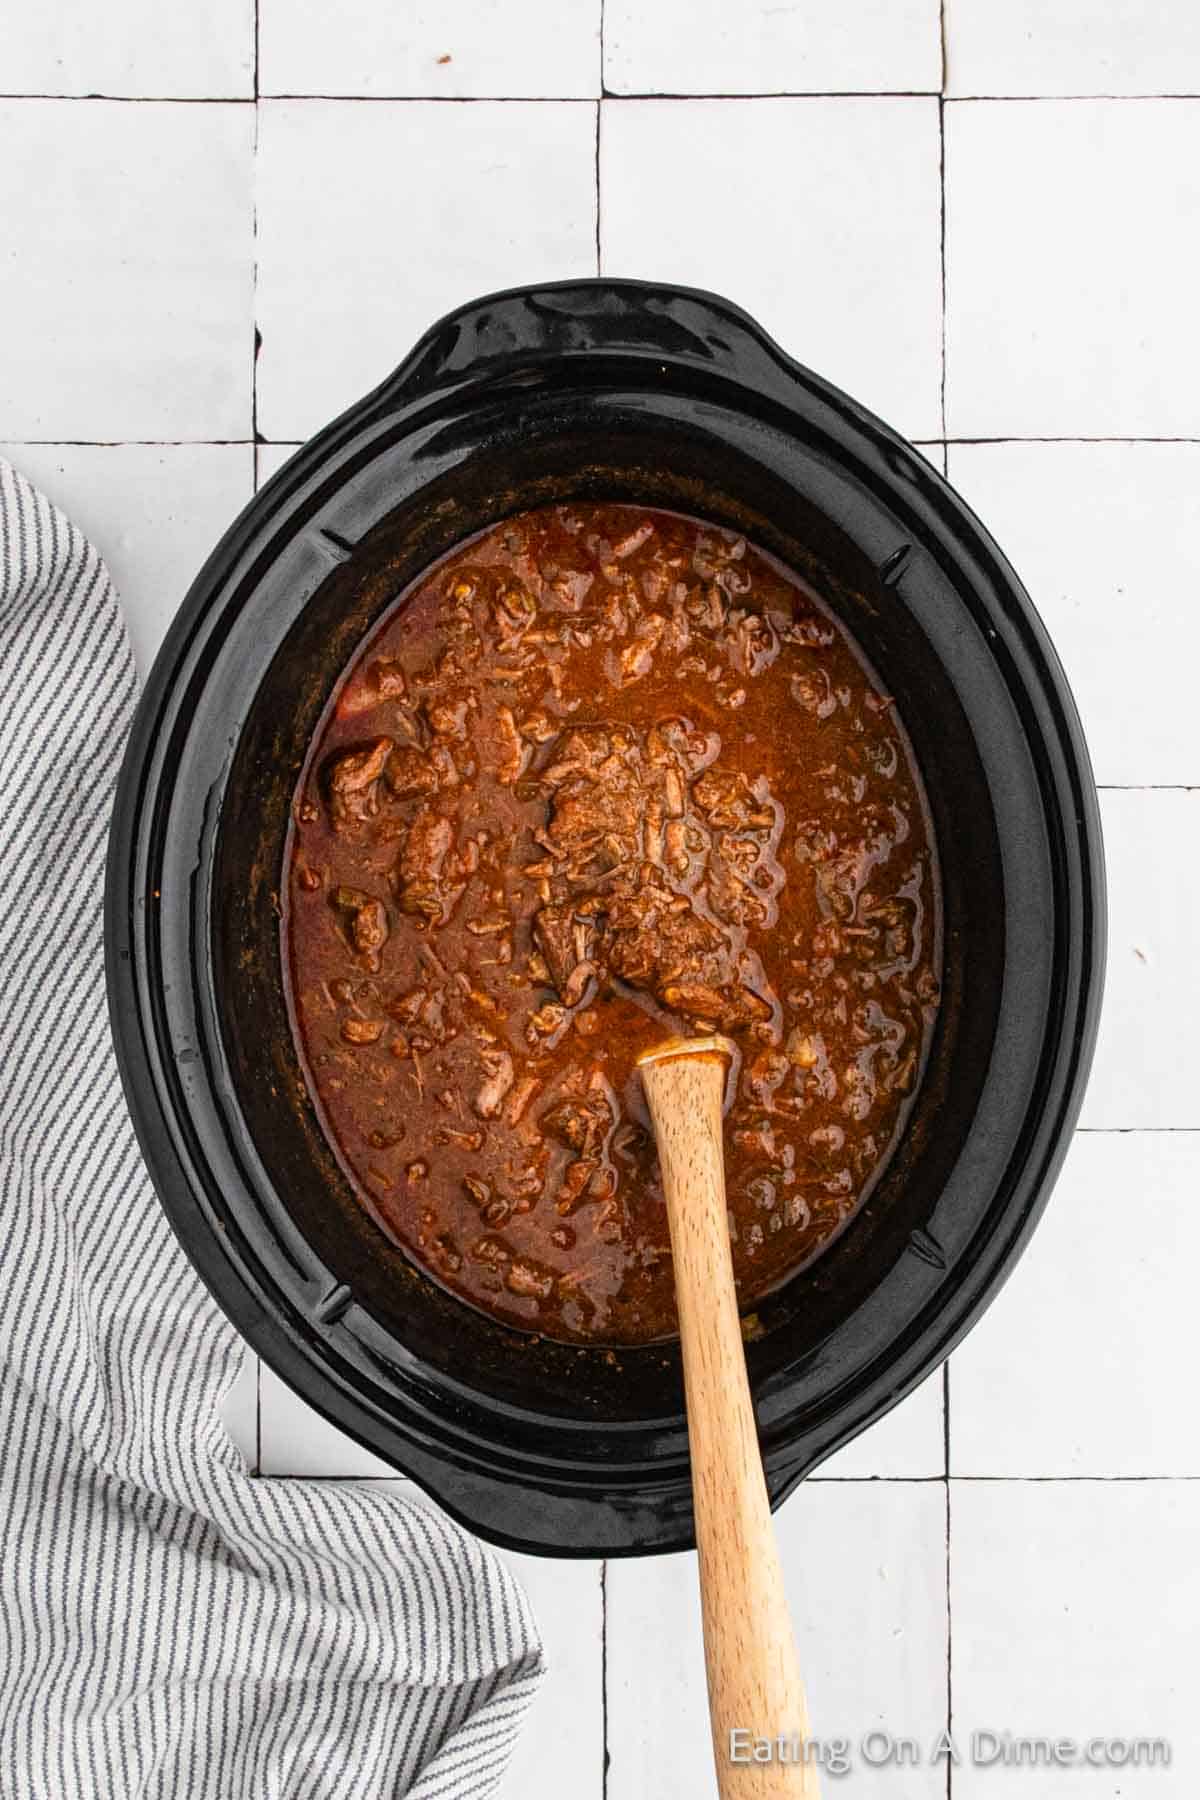 Cooked beef mixture in the slow cooker with a wooden spoon